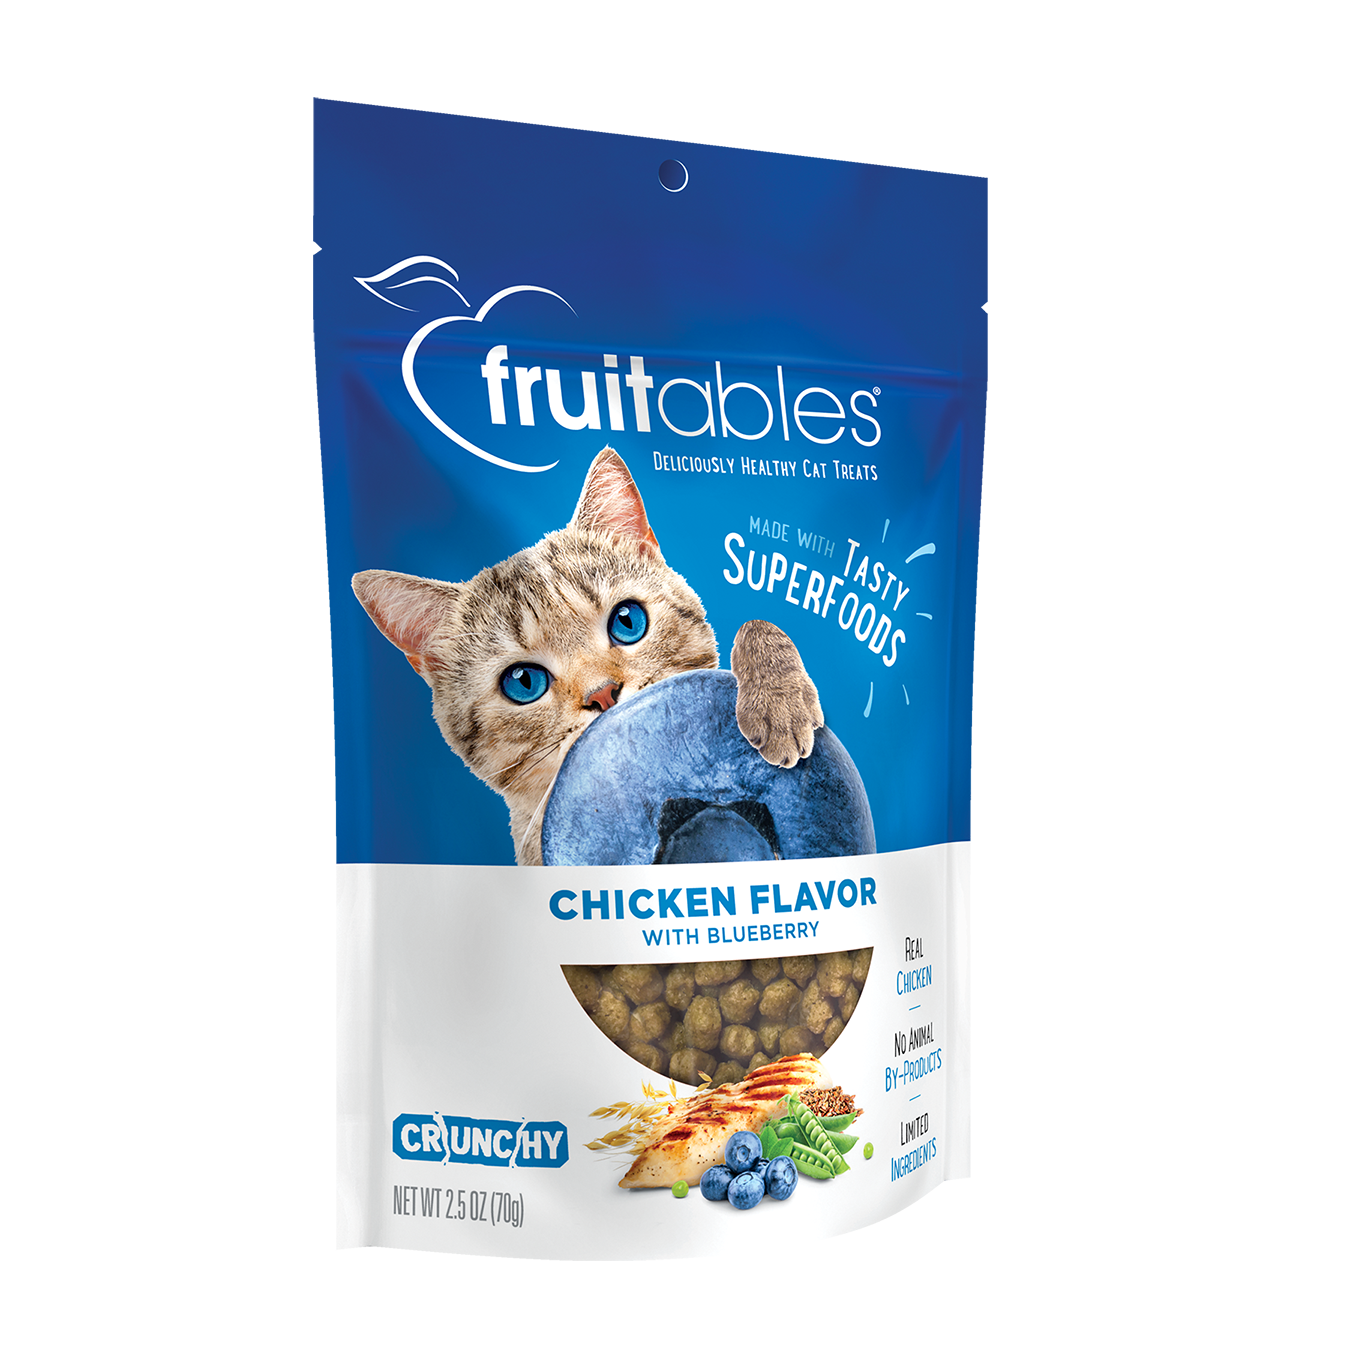 Our healthiest cat treats in chicken flavor with blueberry